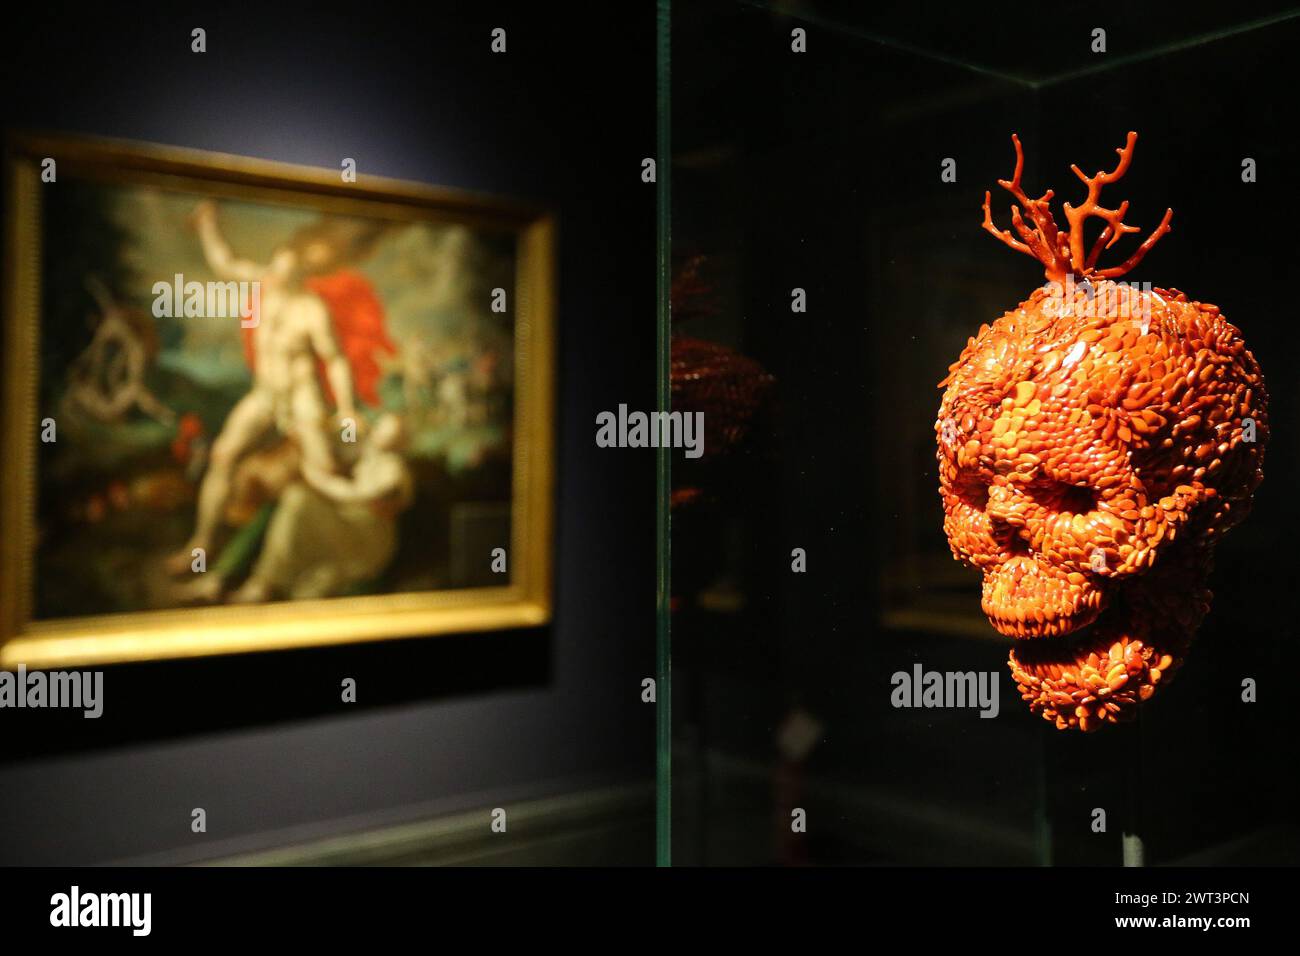 A coral skull, by the artist Jan Fabre, in the 'Red Gold' exhibition, in the Capodimonte museum in Naples. Stock Photo